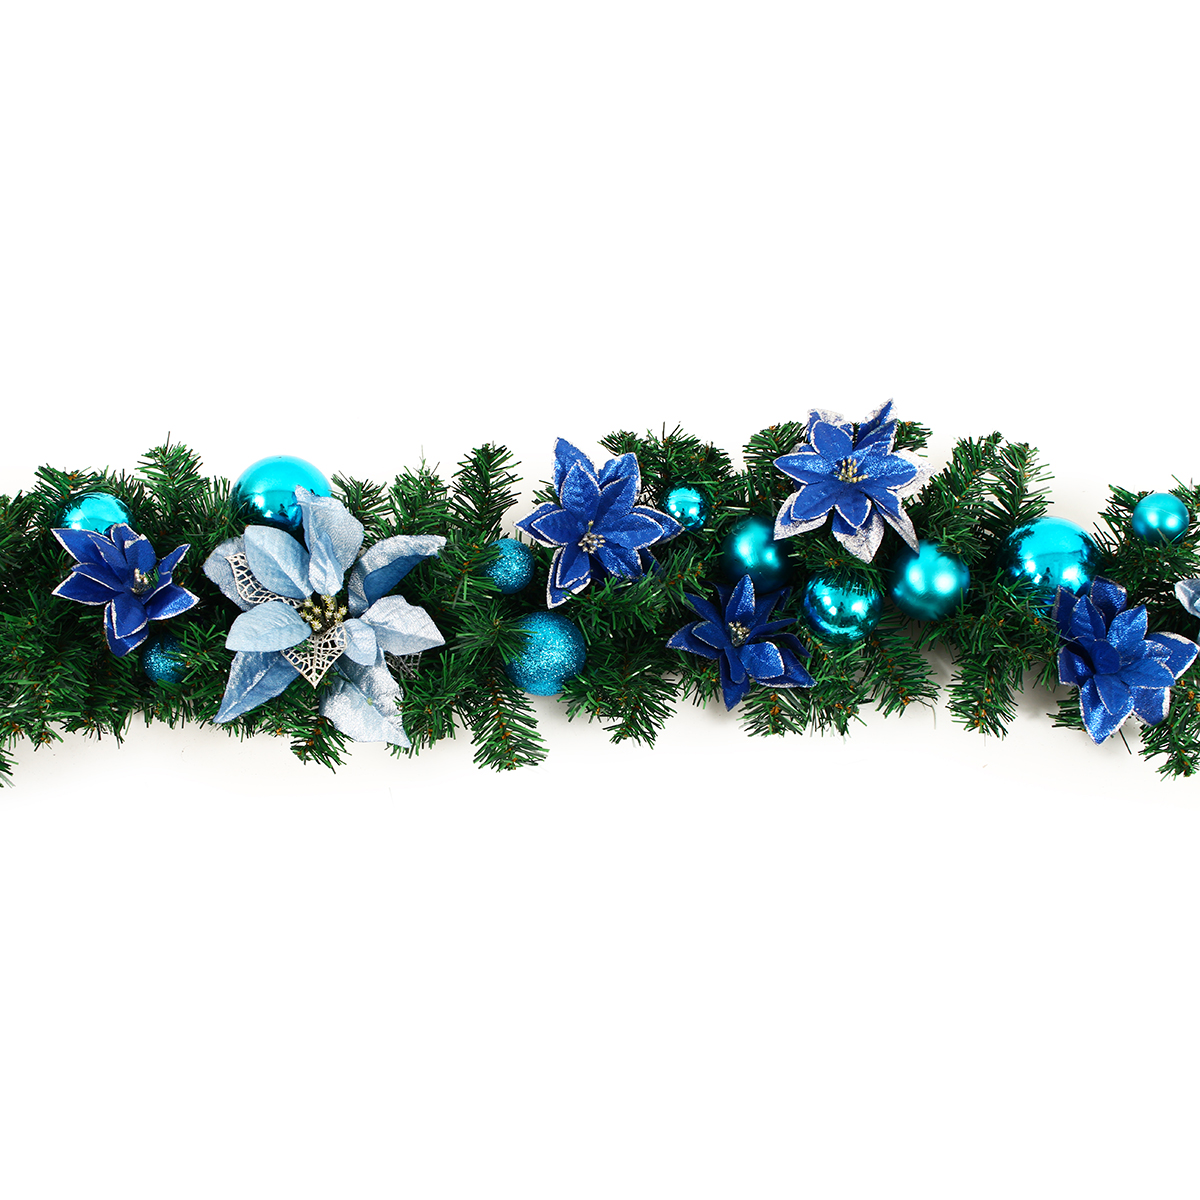 27M-Christmas-Garland-Party-Atificial-Rattan-Bow-Home-Wall-Ornament-Decorations-1363206-2